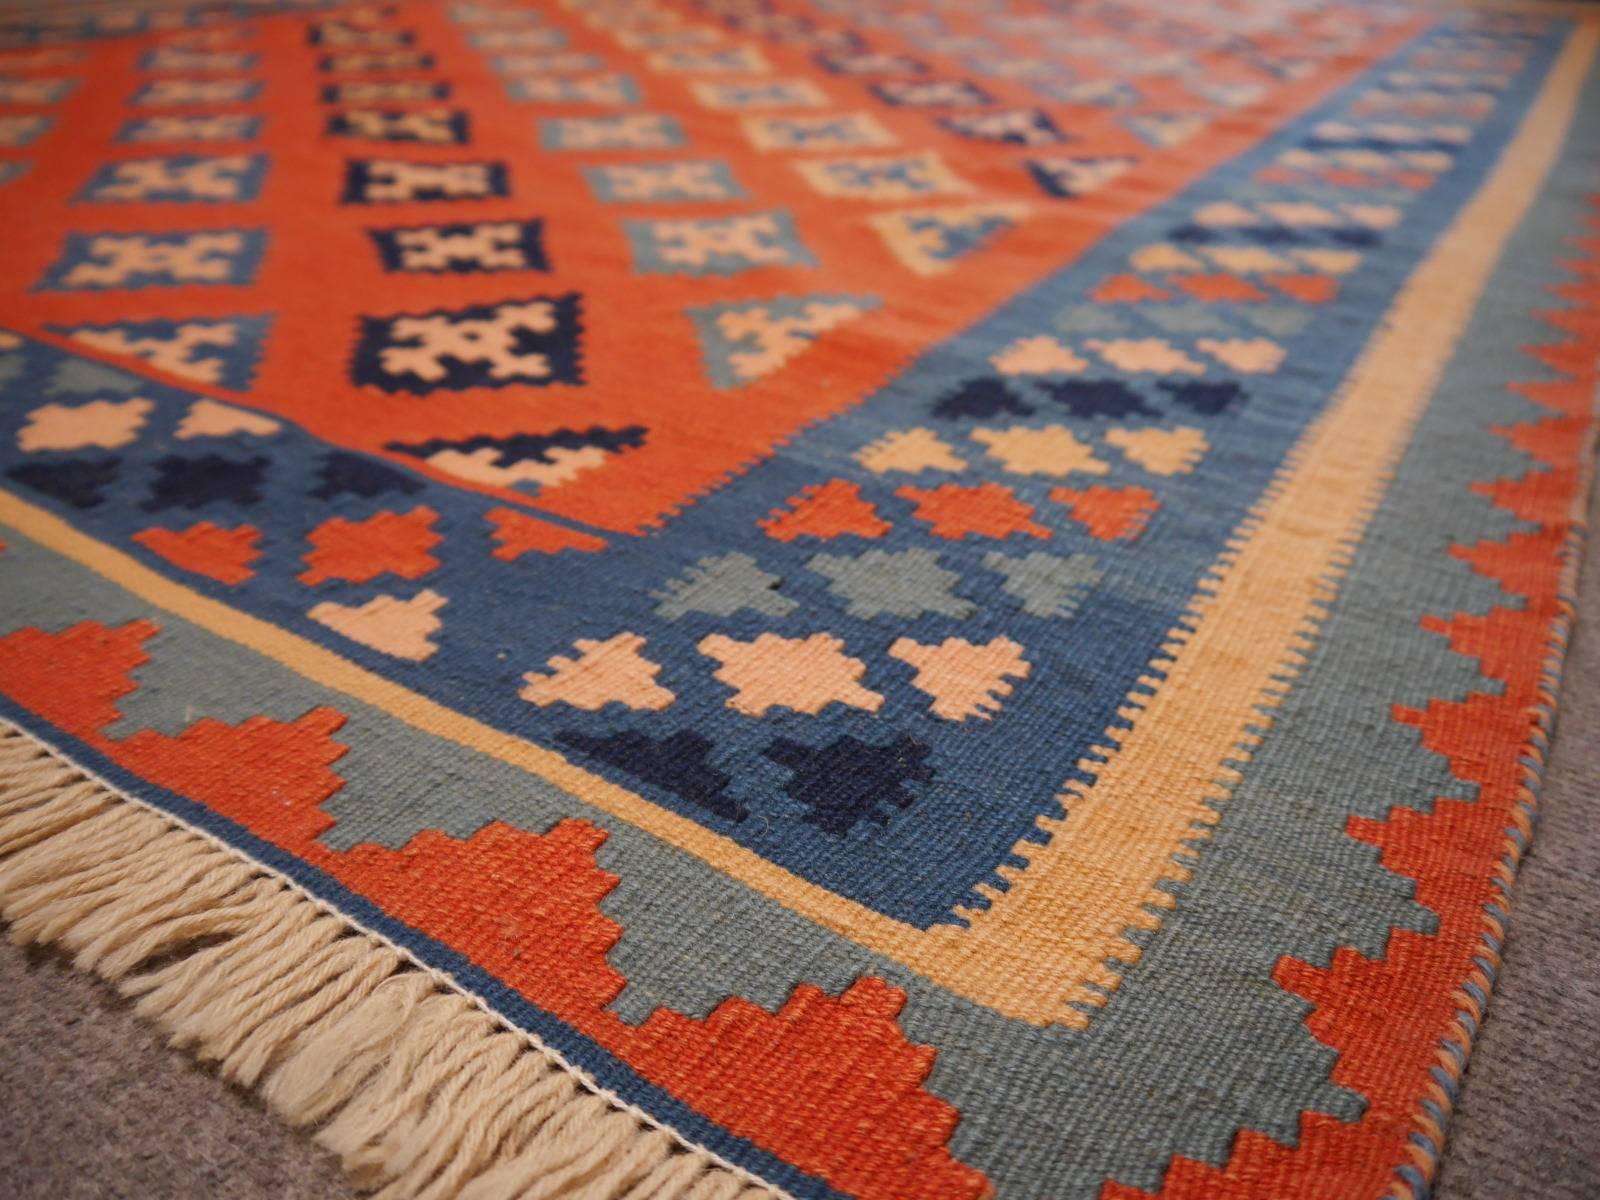 This handwoven Persian Kilim rug was hand woven by women of the Qashqai tribe in southwest Persia. 

Qashgai tribal Kilim rugs are always decorative and colorful works of art, mainly using the colors red (made from the Ronnas plant), blue (from